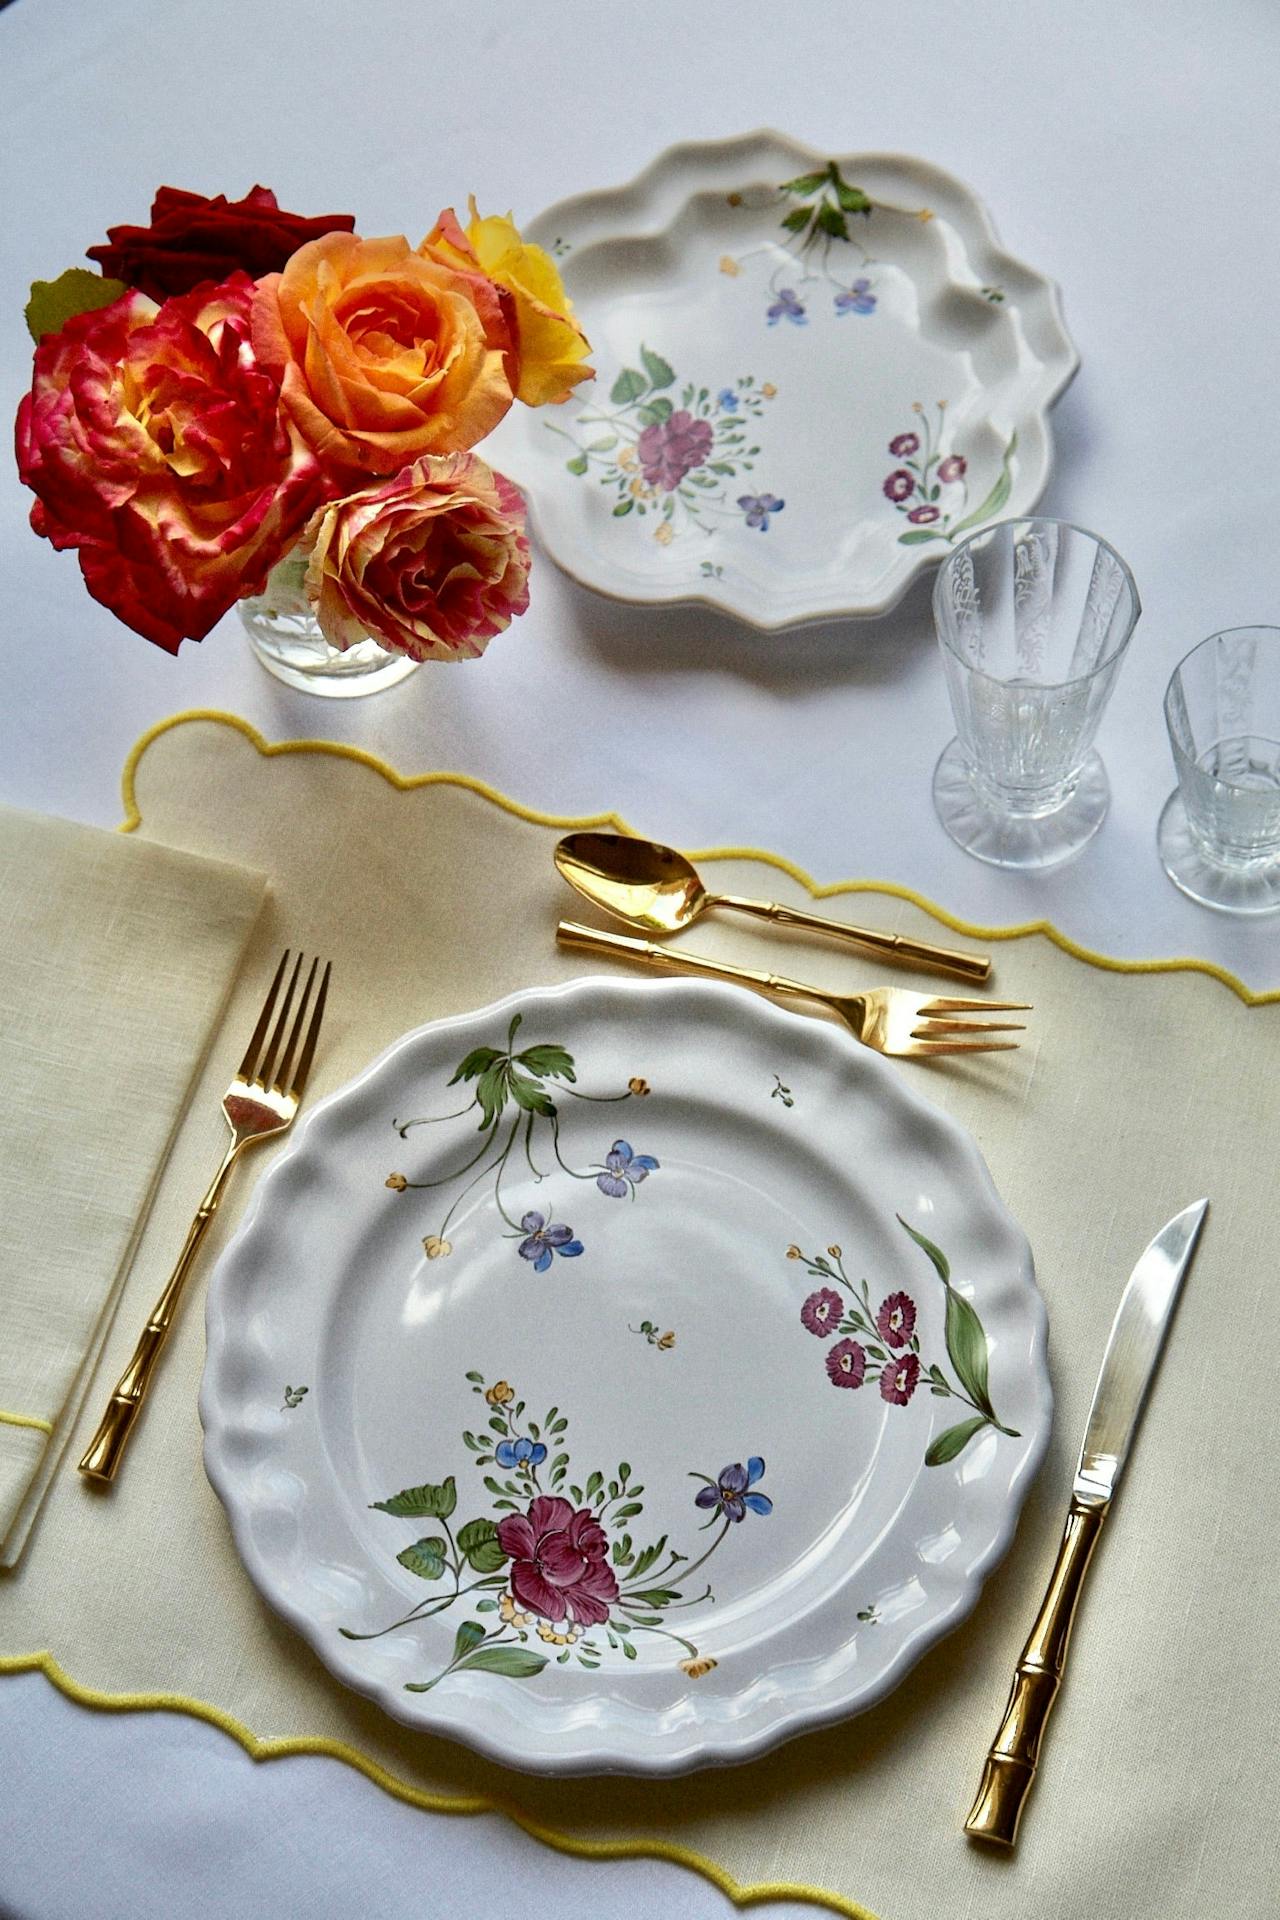 Shop Z.d.G at Collagerie to discover a wide selection of beautiful linens, plates and crockery. Shop luxury European homeware online now | Collagerie.com